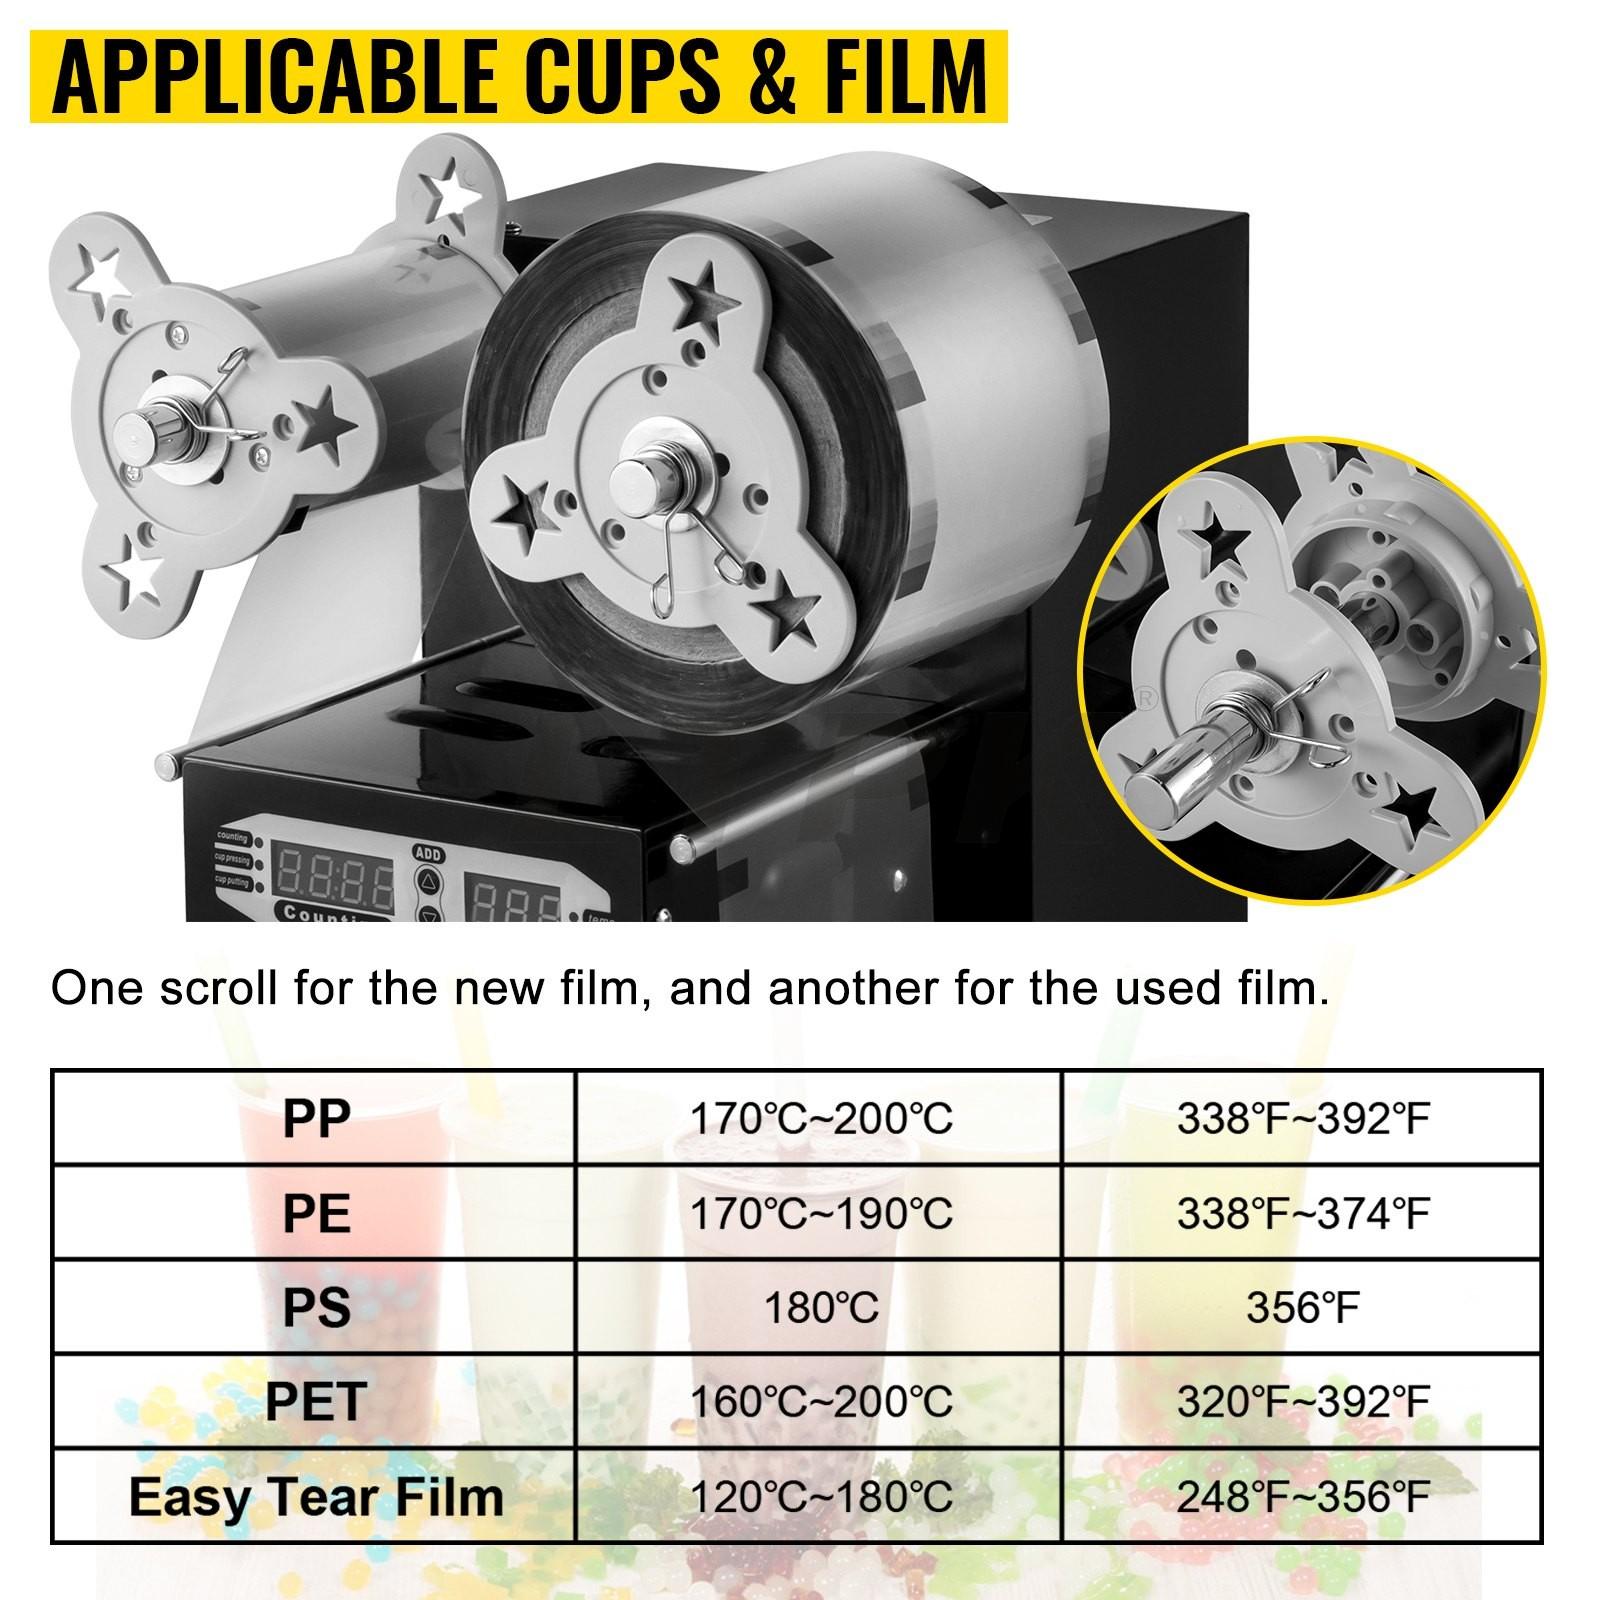 LTPK Cup Sealer Black With Digital Control for Sealing PP PET Paper Cups